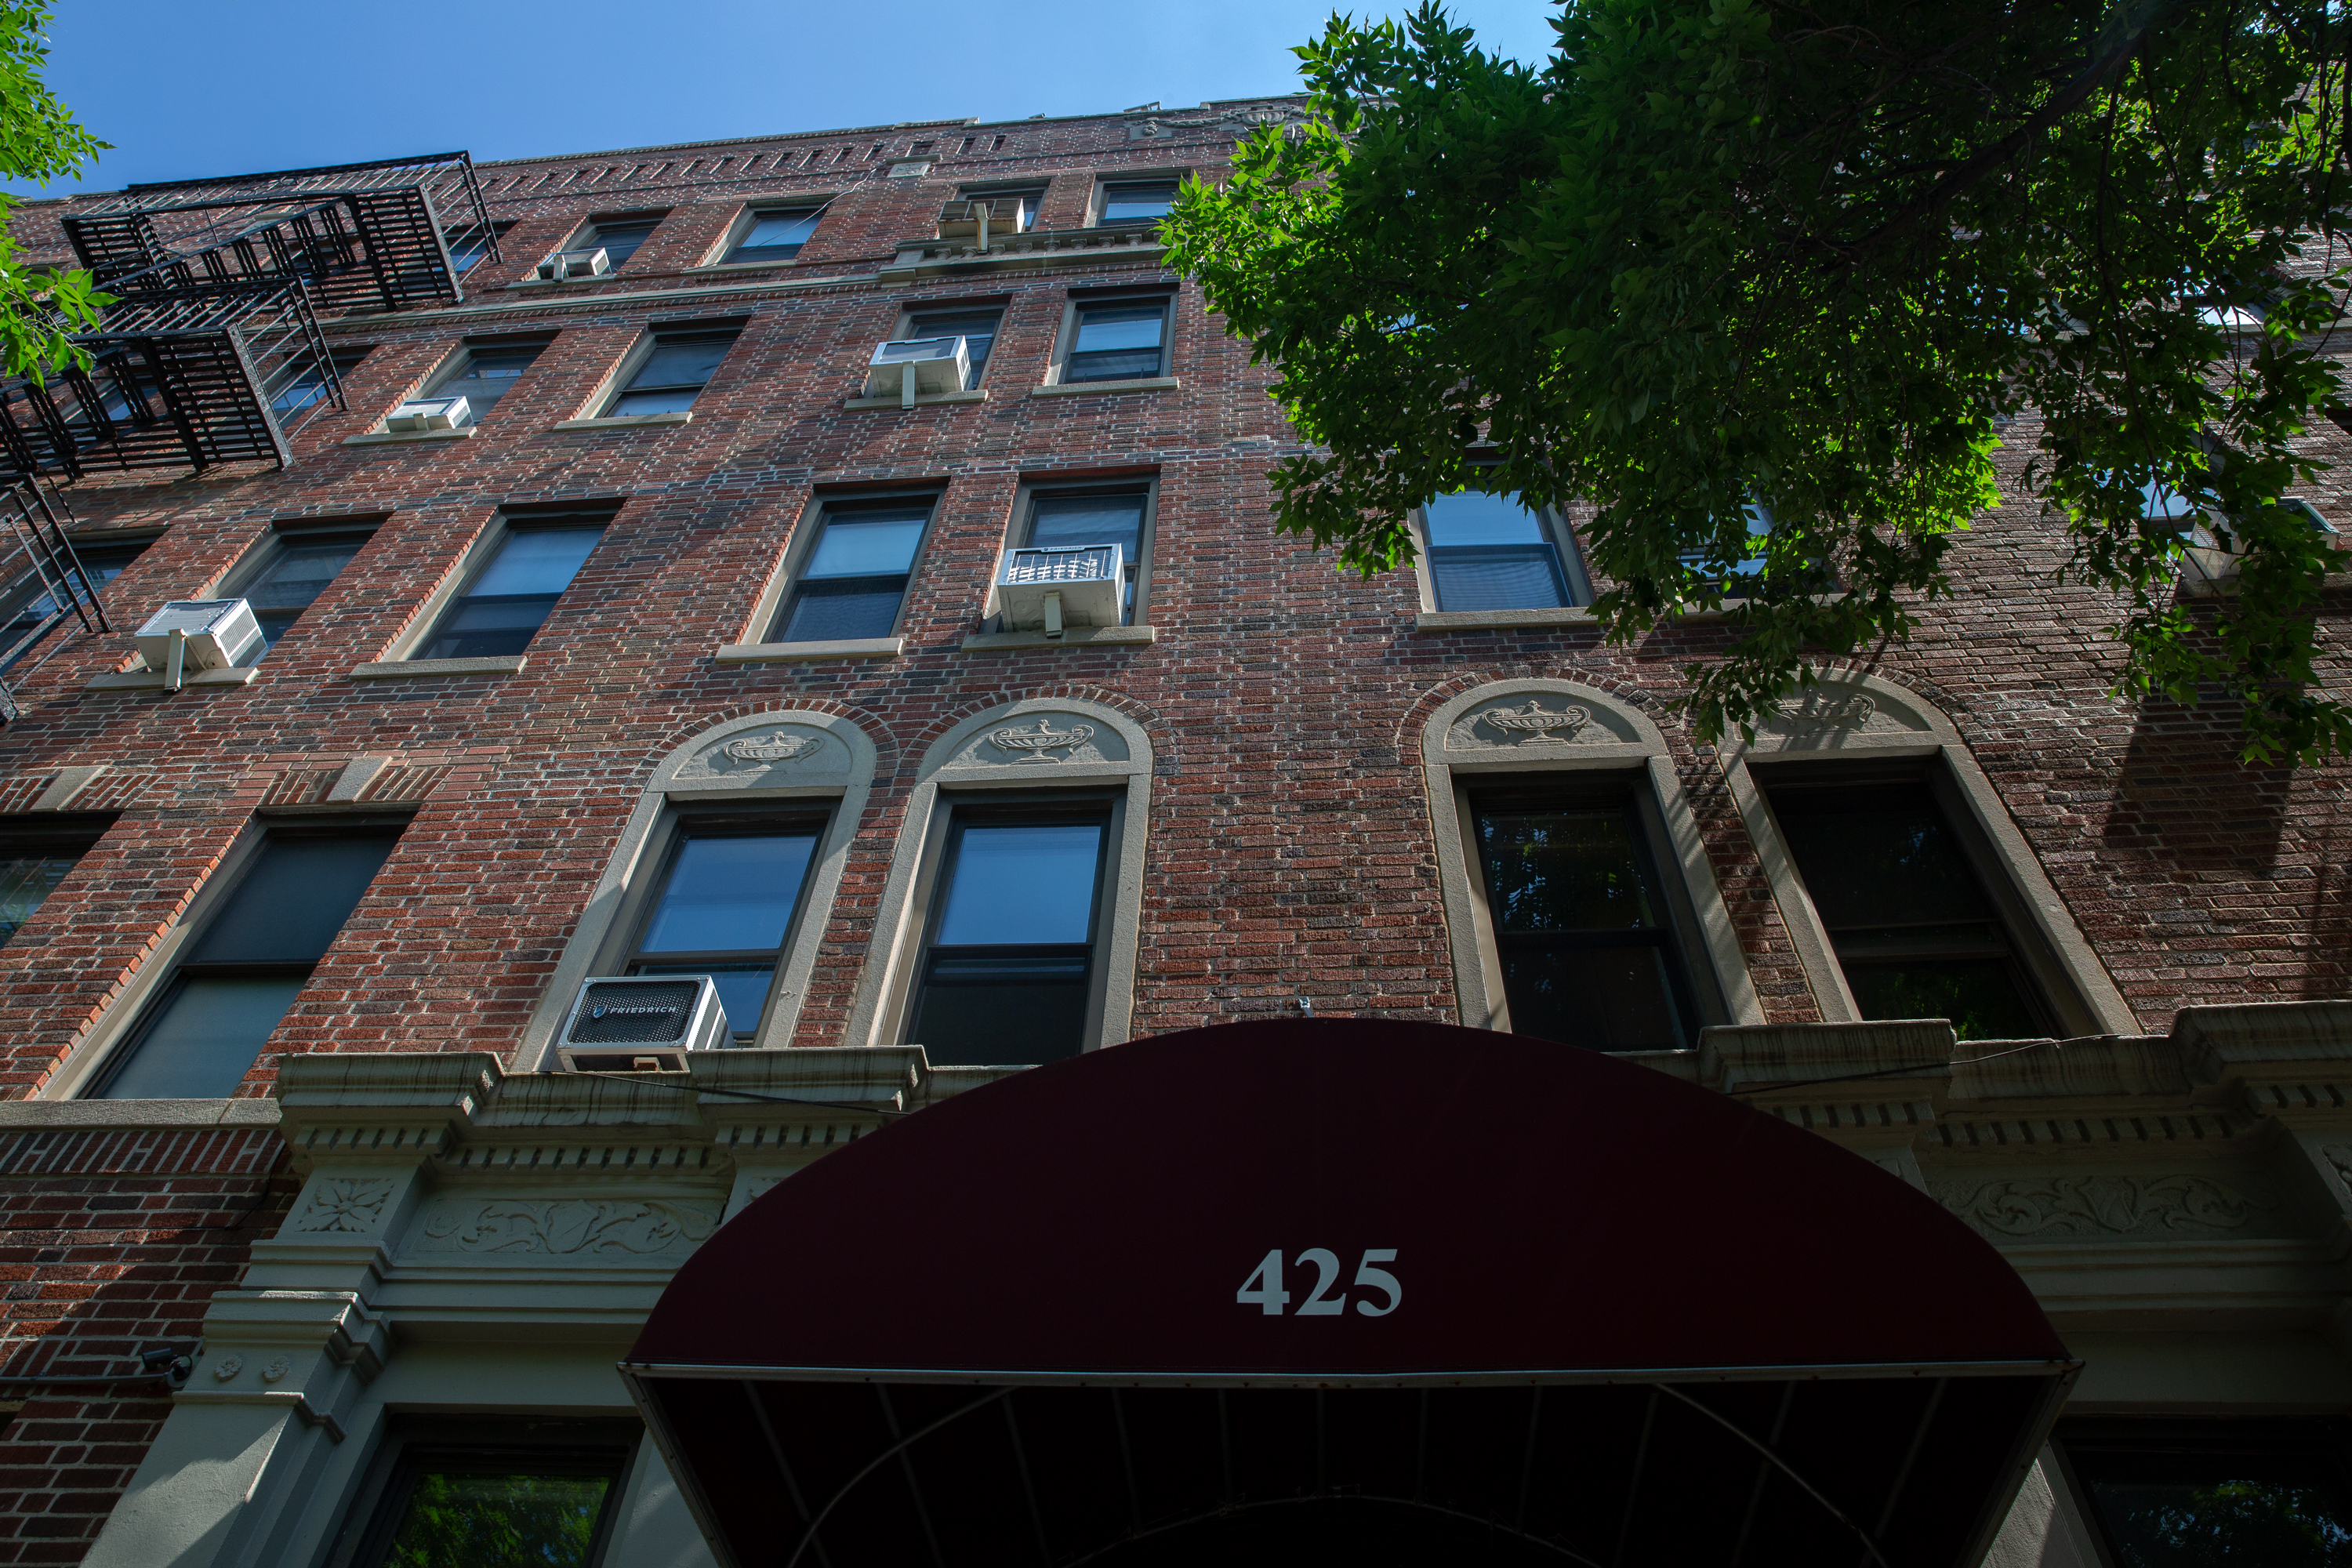 The Prospect Heights building where Eric Adams and Sylvia Cowan bought a co-op in 1992.